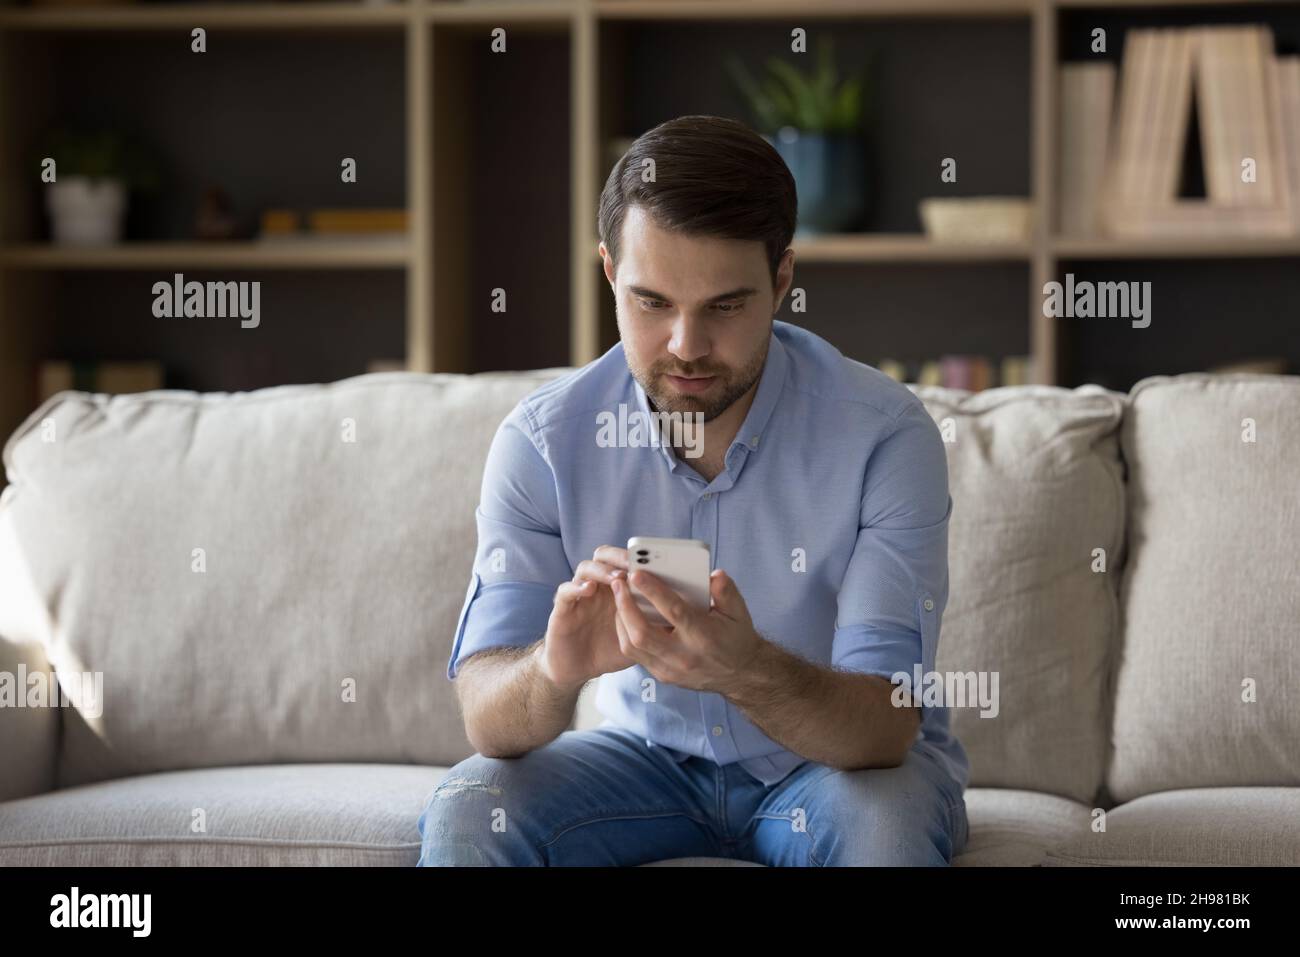 Focused millennial guy un casual using cellphone on couch Stock Photo